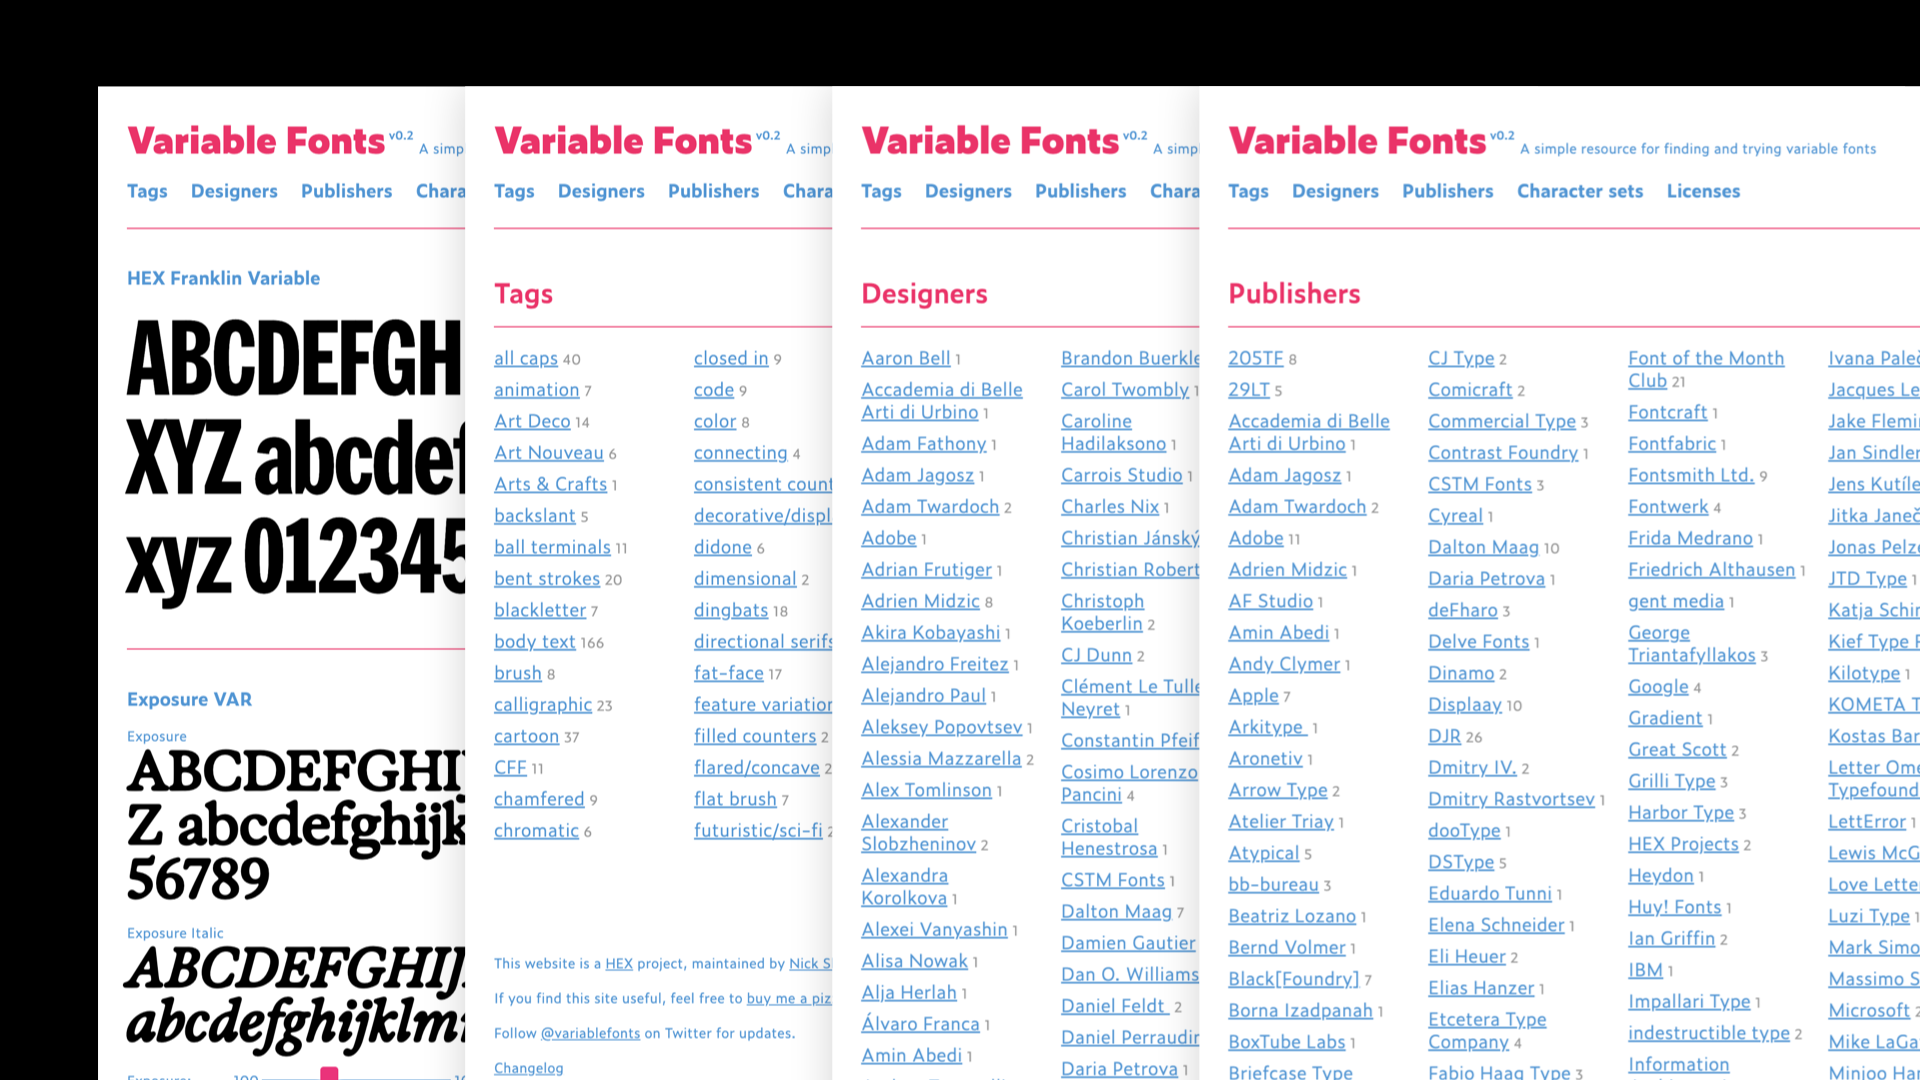 The various taxonomies present on Nick Sherman’s “Variable Fonts” website.